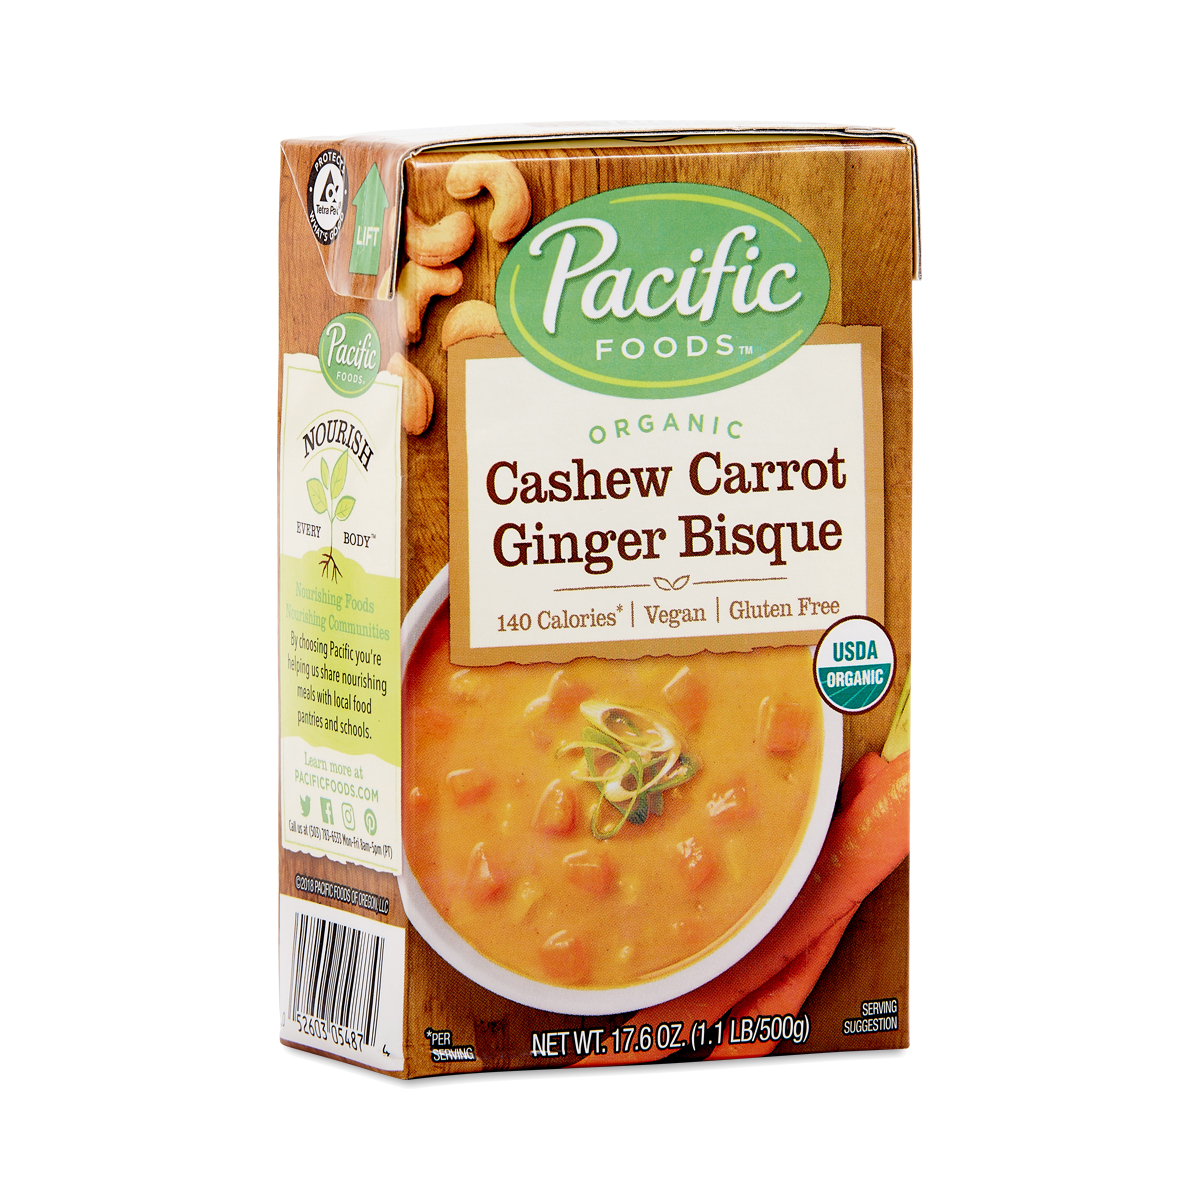 Pacific Foods Cashew Carrot Ginger Bisque 17.6 oz carton